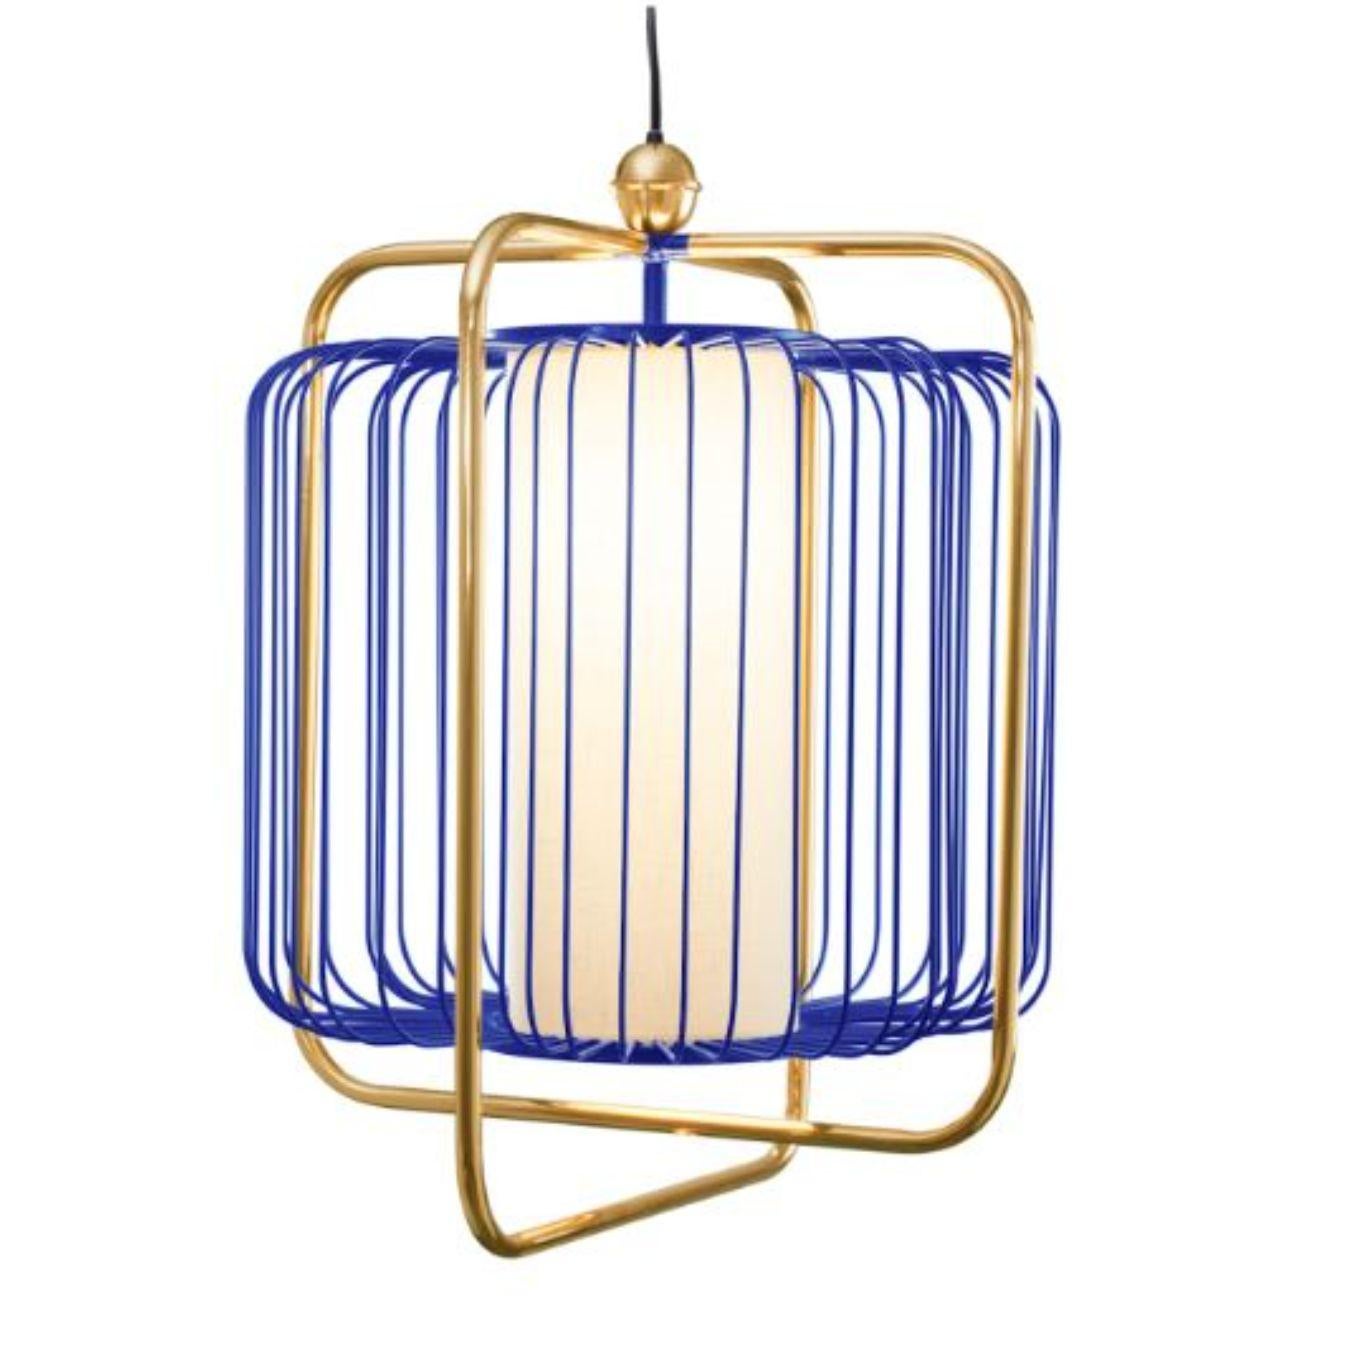 Brass and Cobalt Jules suspension lamp by Dooq
Dimensions: W 73 x D 73 x H 72 cm
Materials: lacquered metal, polished or brushed metal, brass.
abat-jour: cotton
Also available in different colors and materials.